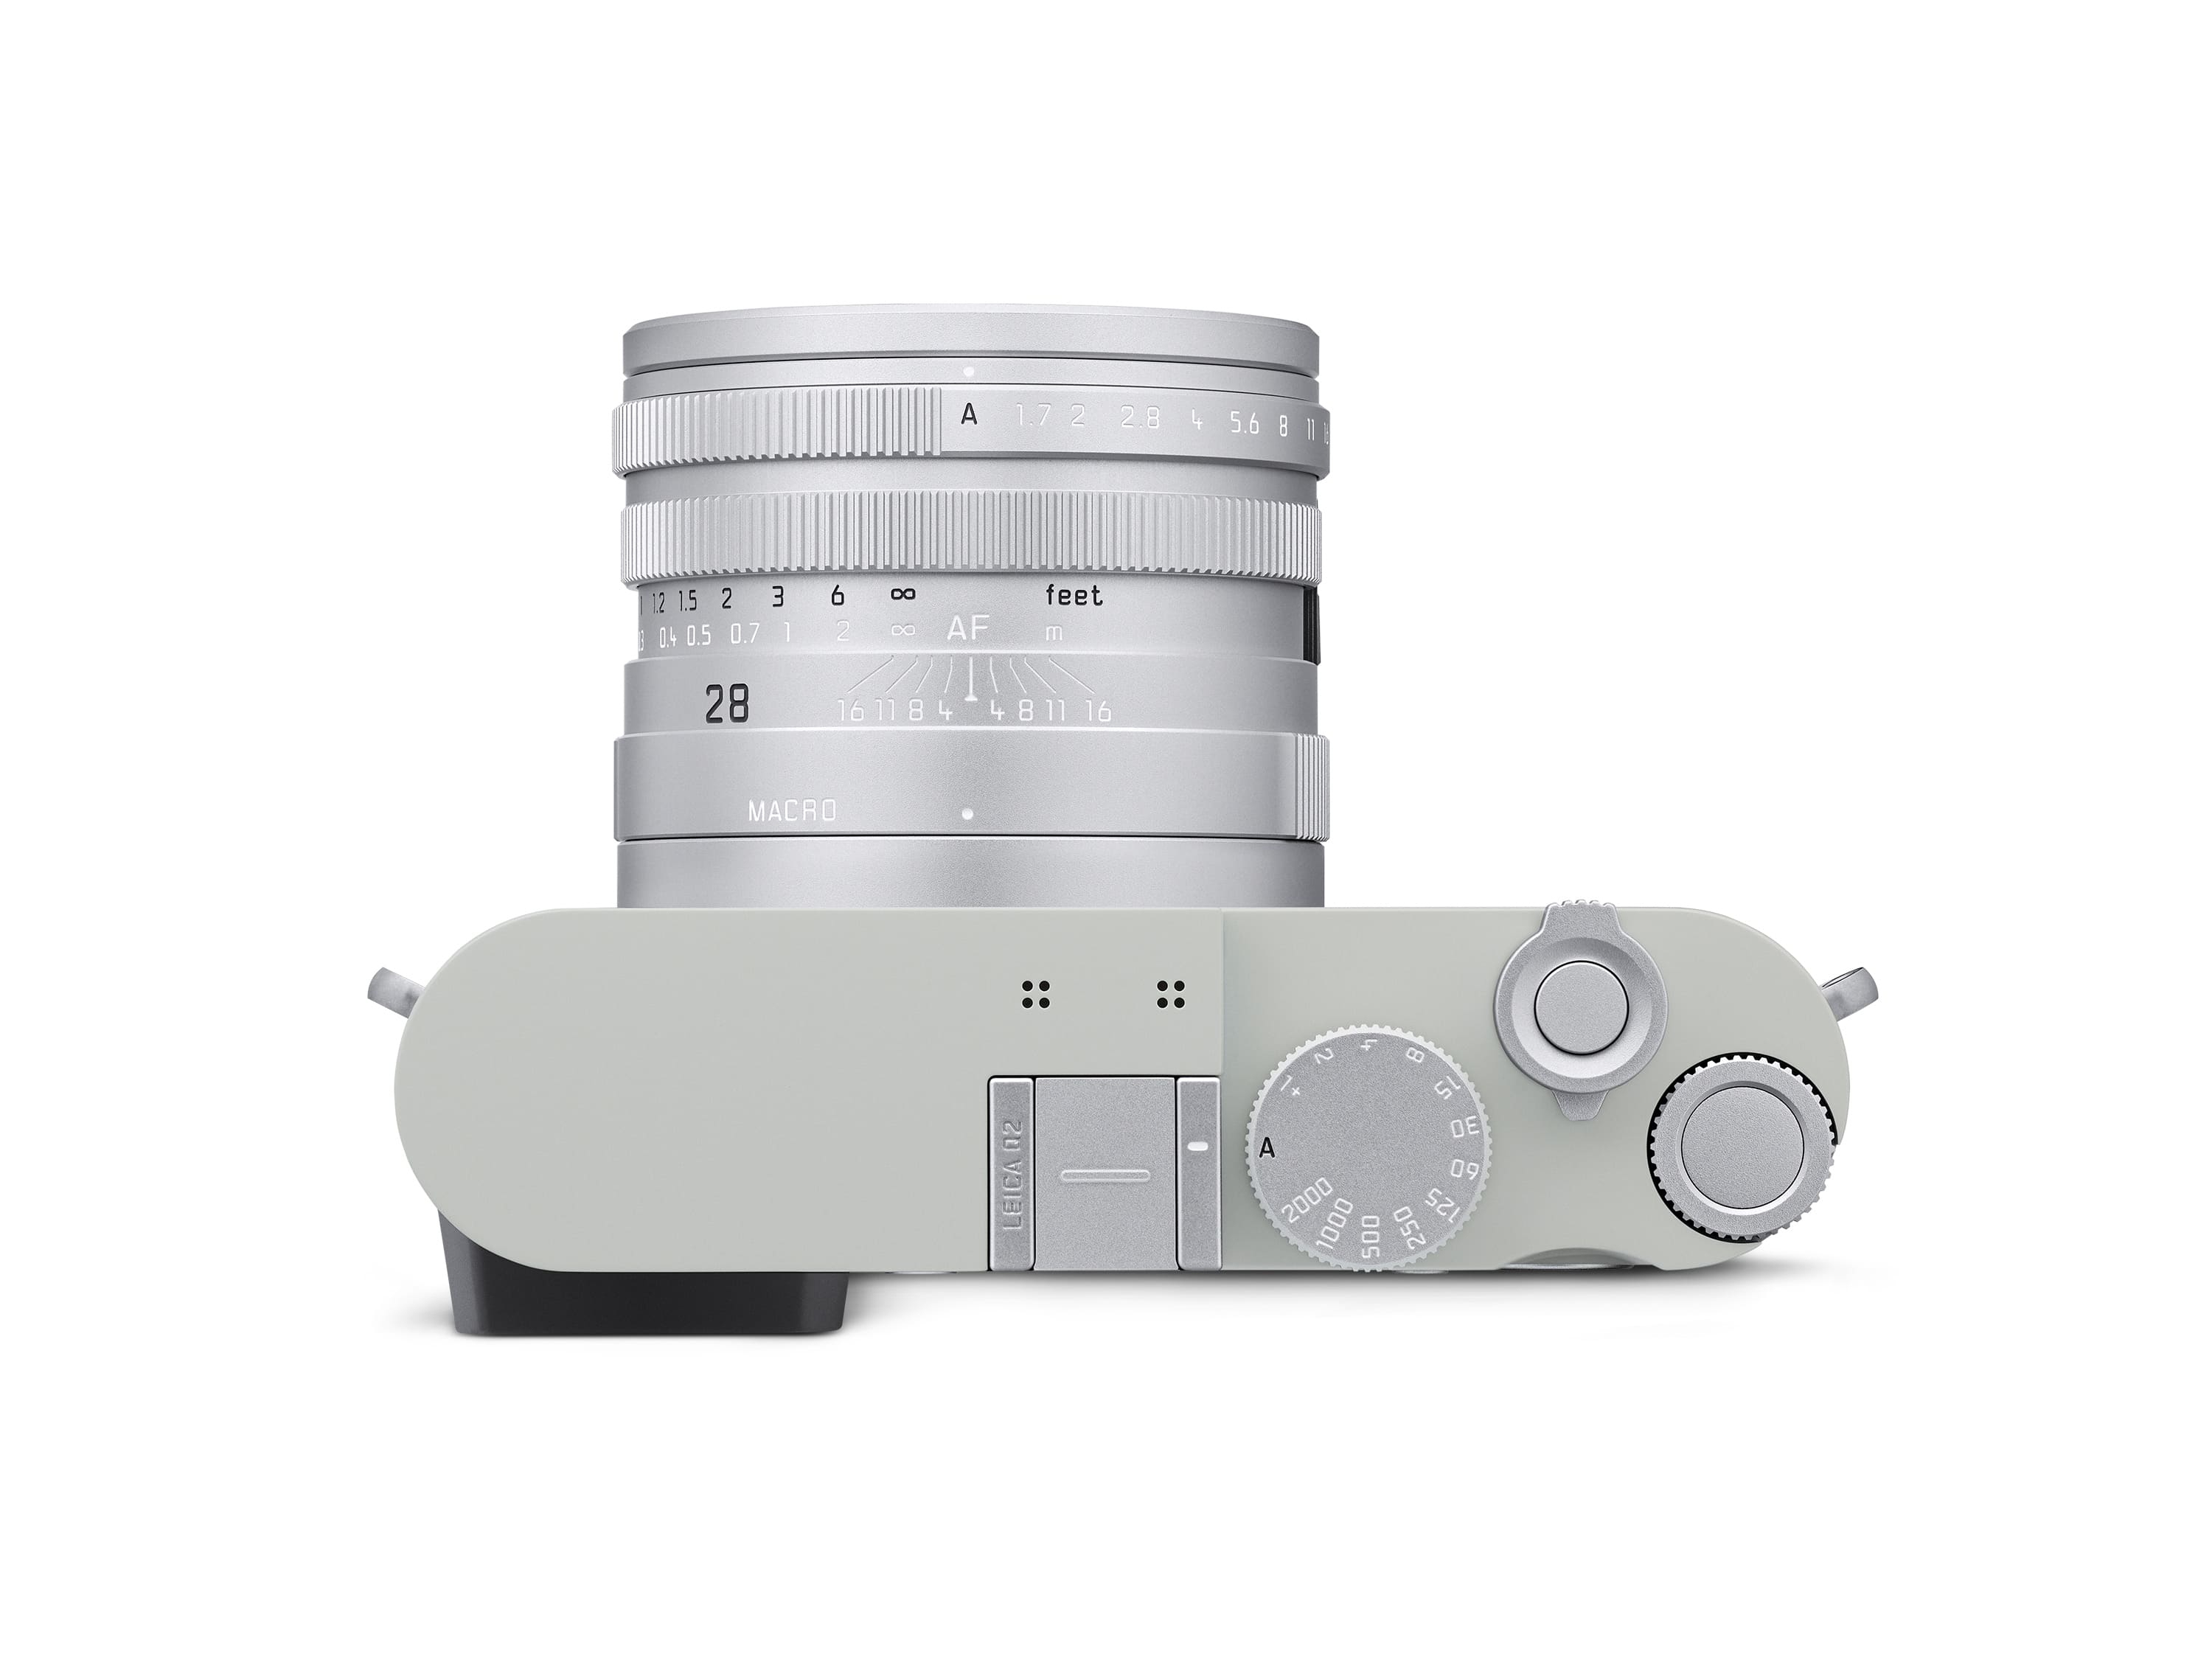 LEICA Q2 “Ghost” by Hodinkee